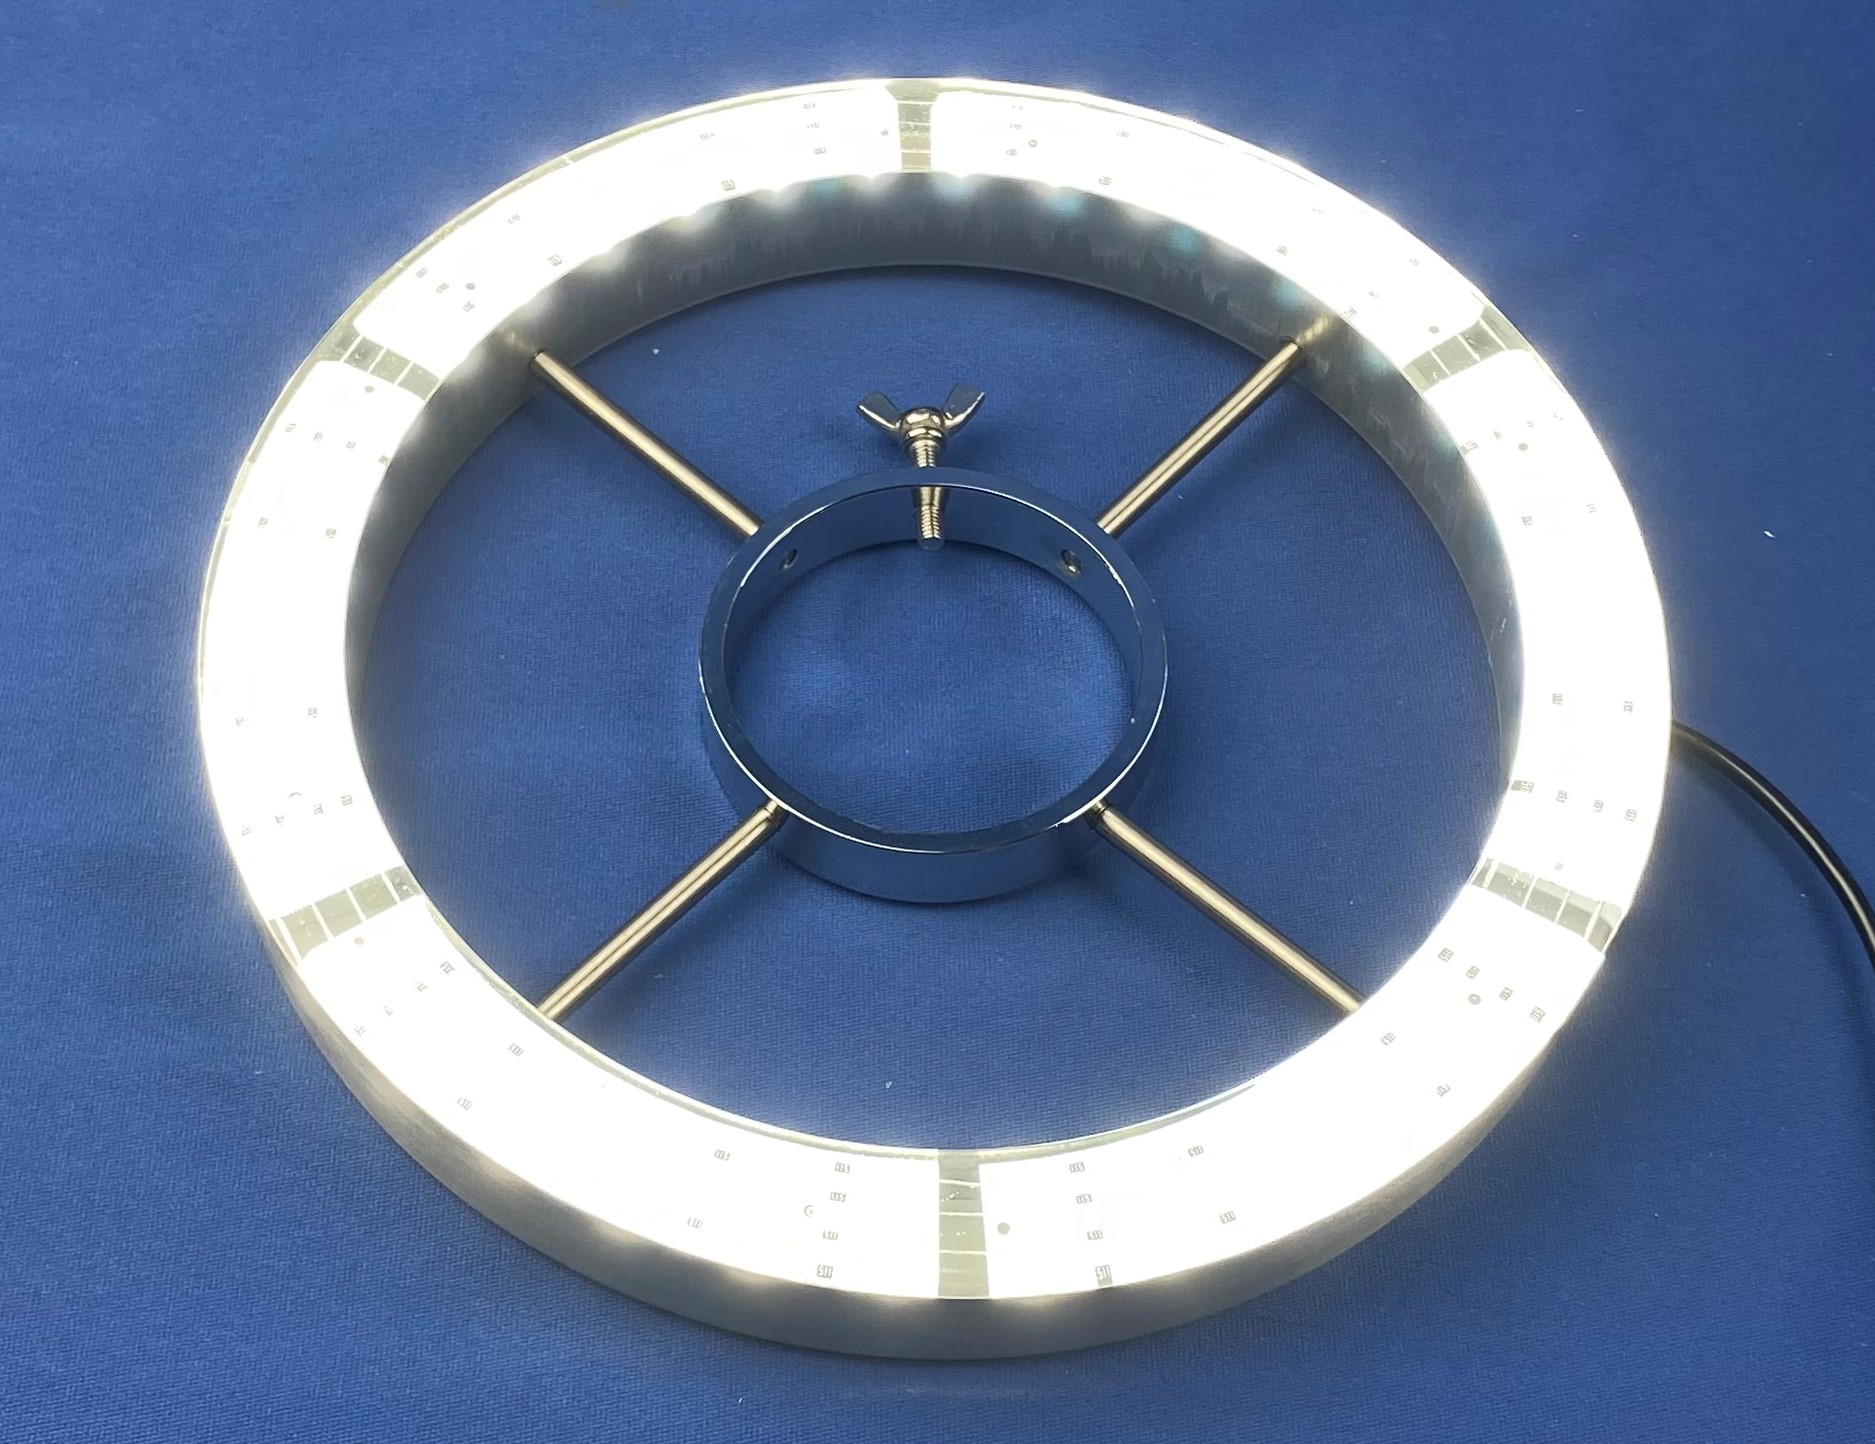 Super Bright 24W Submersible LED Fountain Light Ring